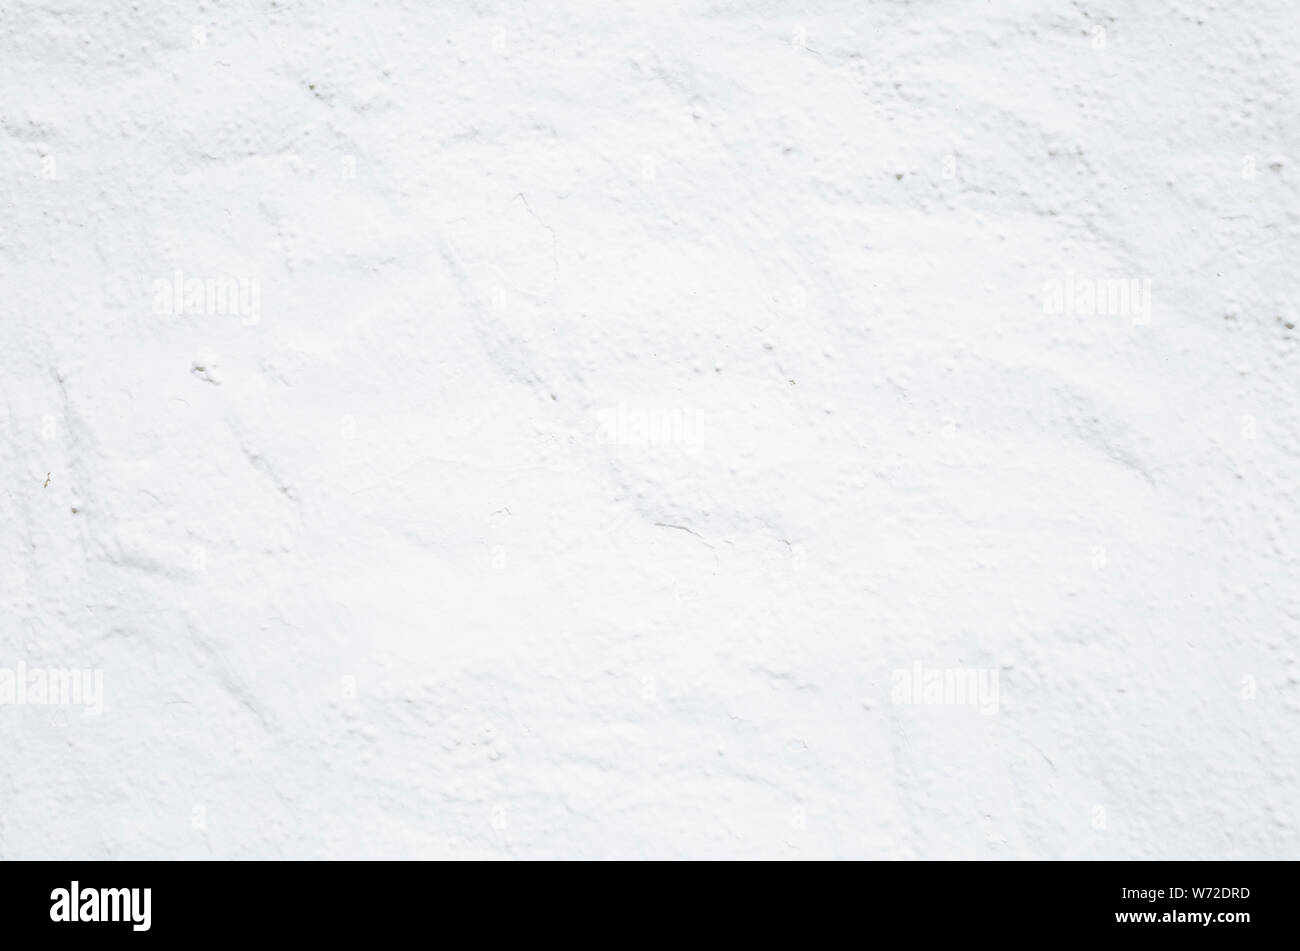 Calahonda, Granada pronince, Andalusia, Spain : Detail of a whitewashed wall. Stock Photo